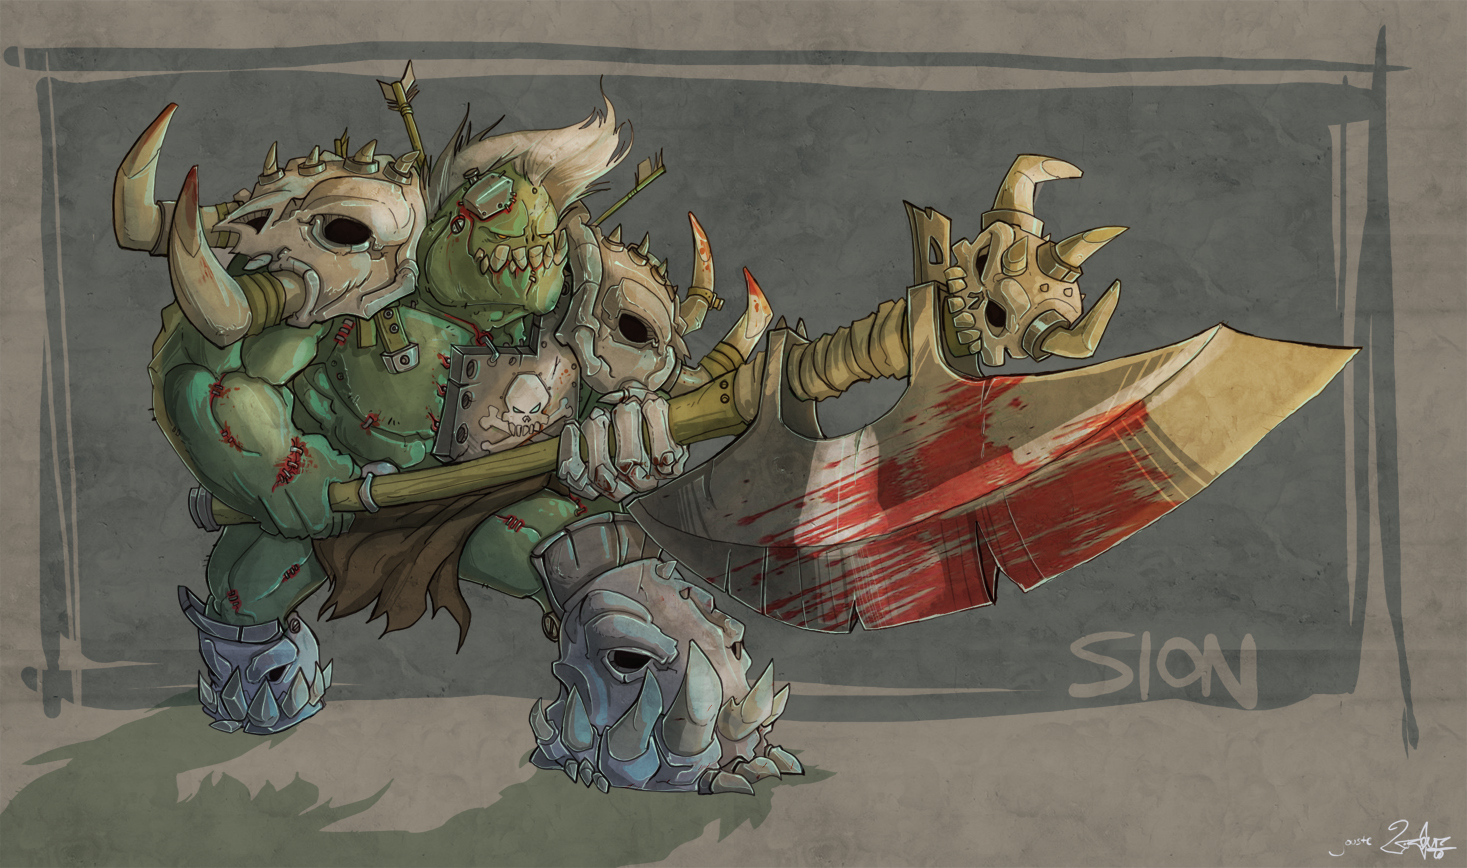 sion_the_slaughterer_by_jouste.jpg